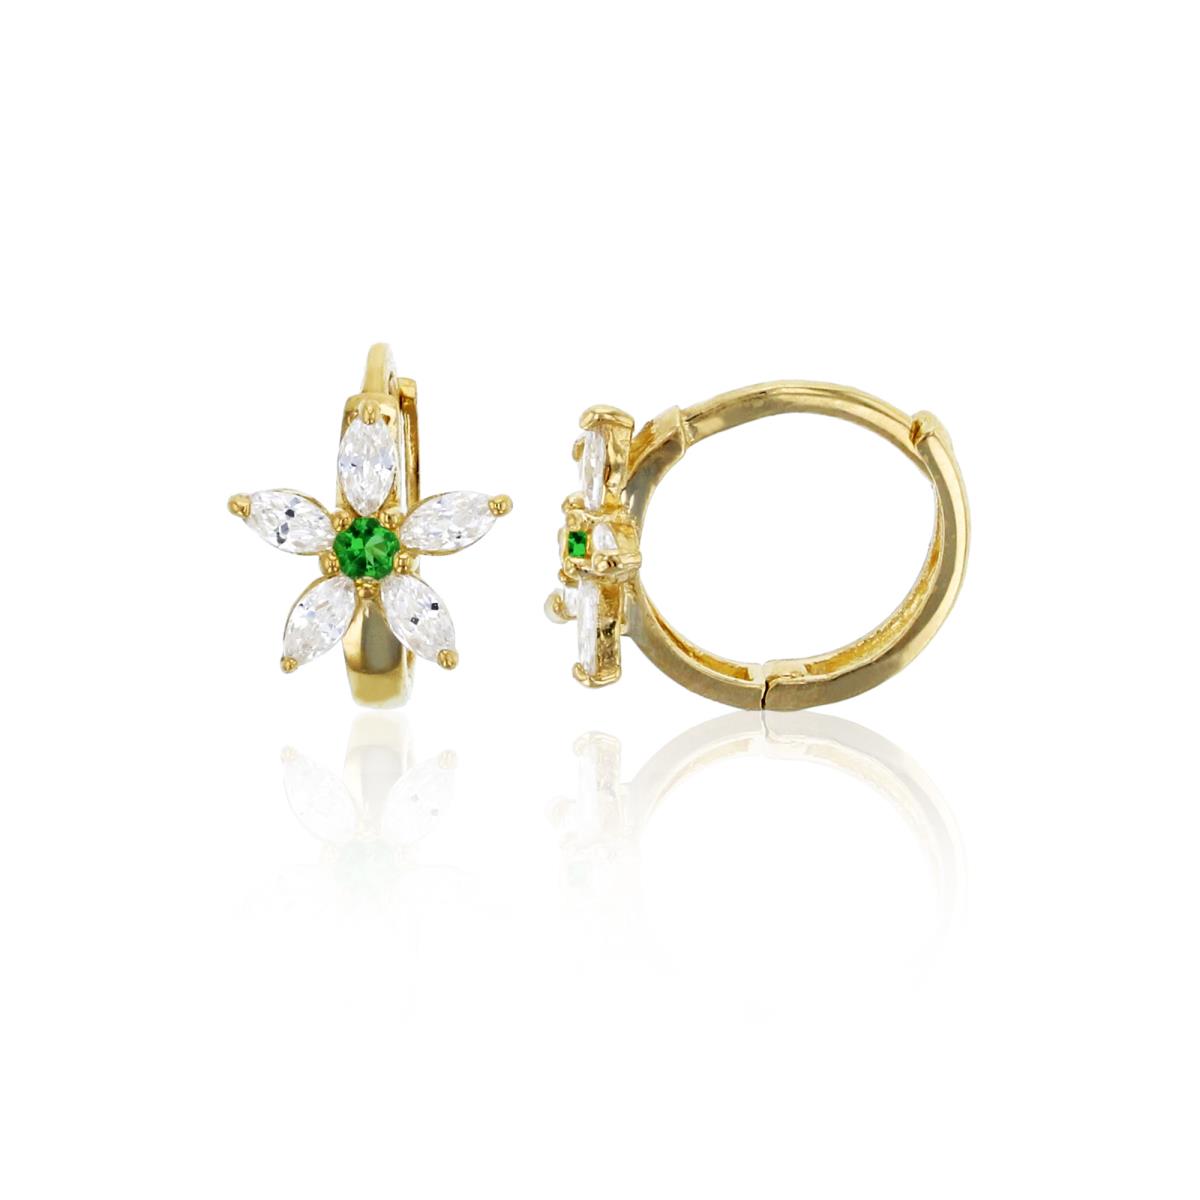 14K Yellow Gold 8x10mm Clear and Green Emerald CZ Flower Huggie Earring